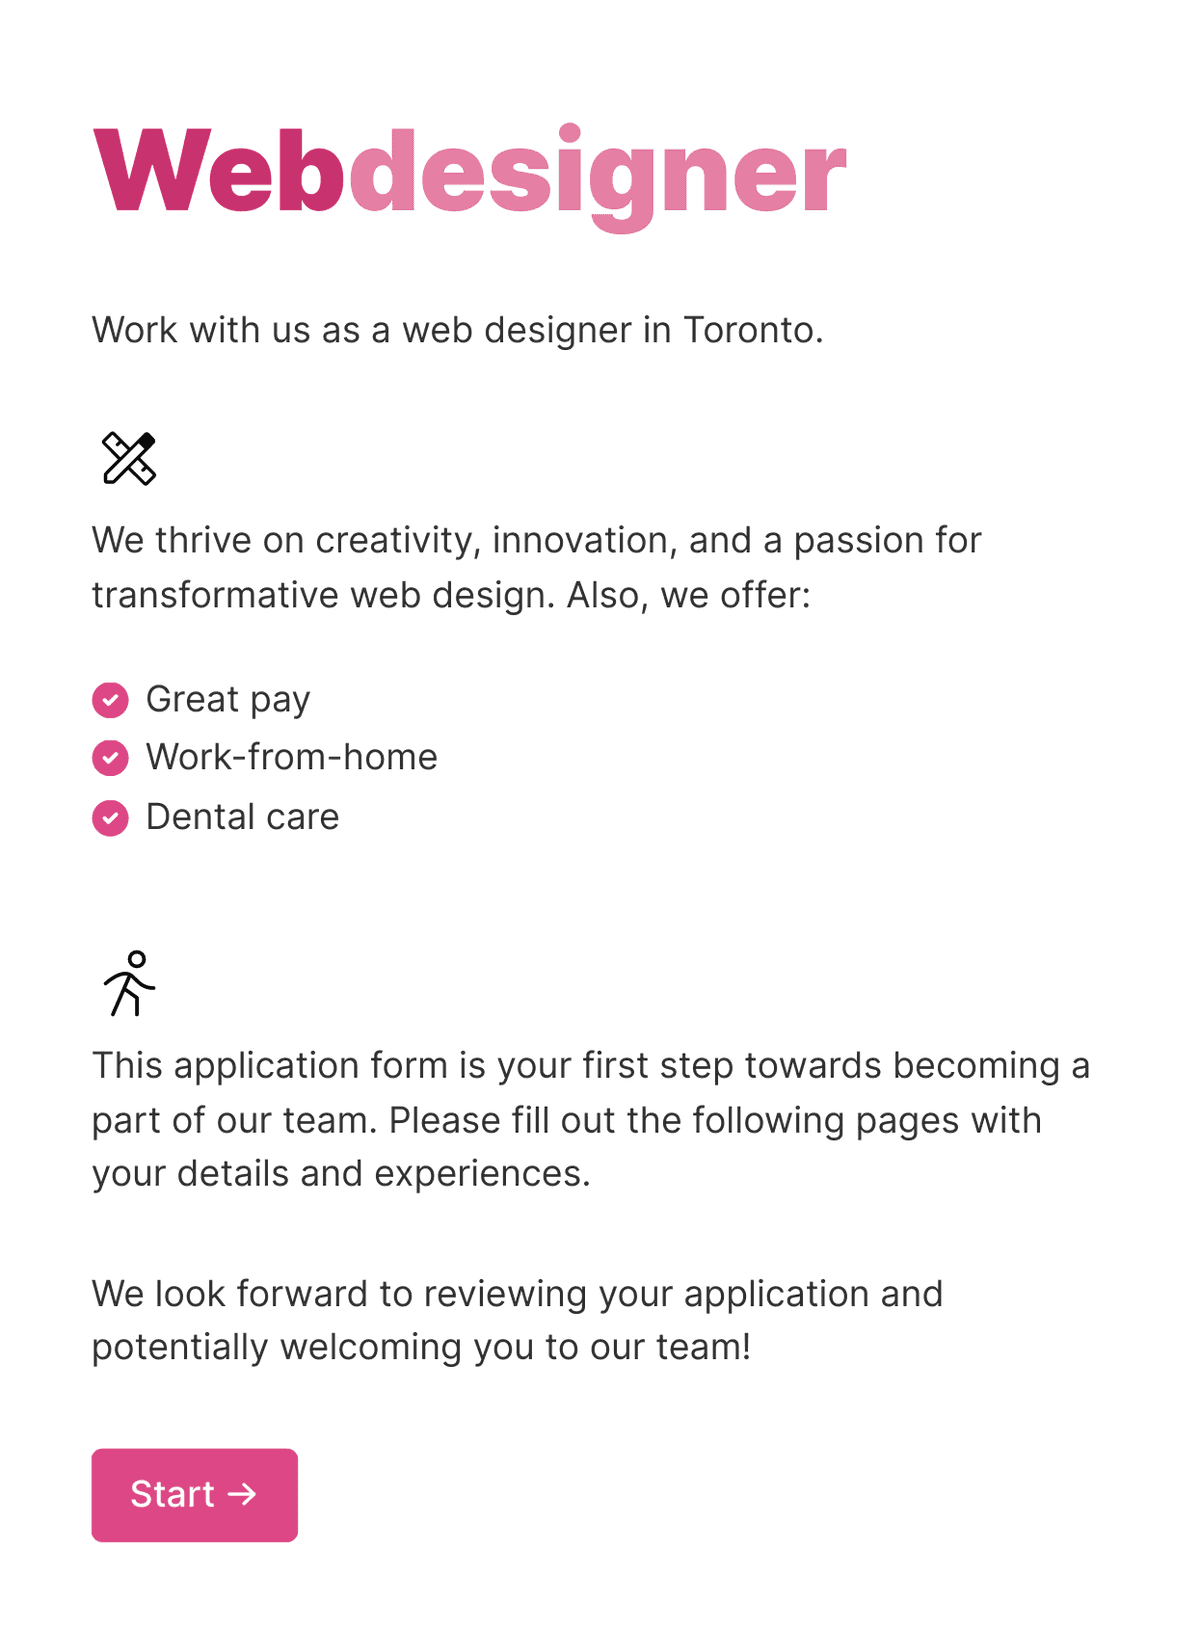 Welcome page of a job application form describing the position and benefits, along with a 'Start' button